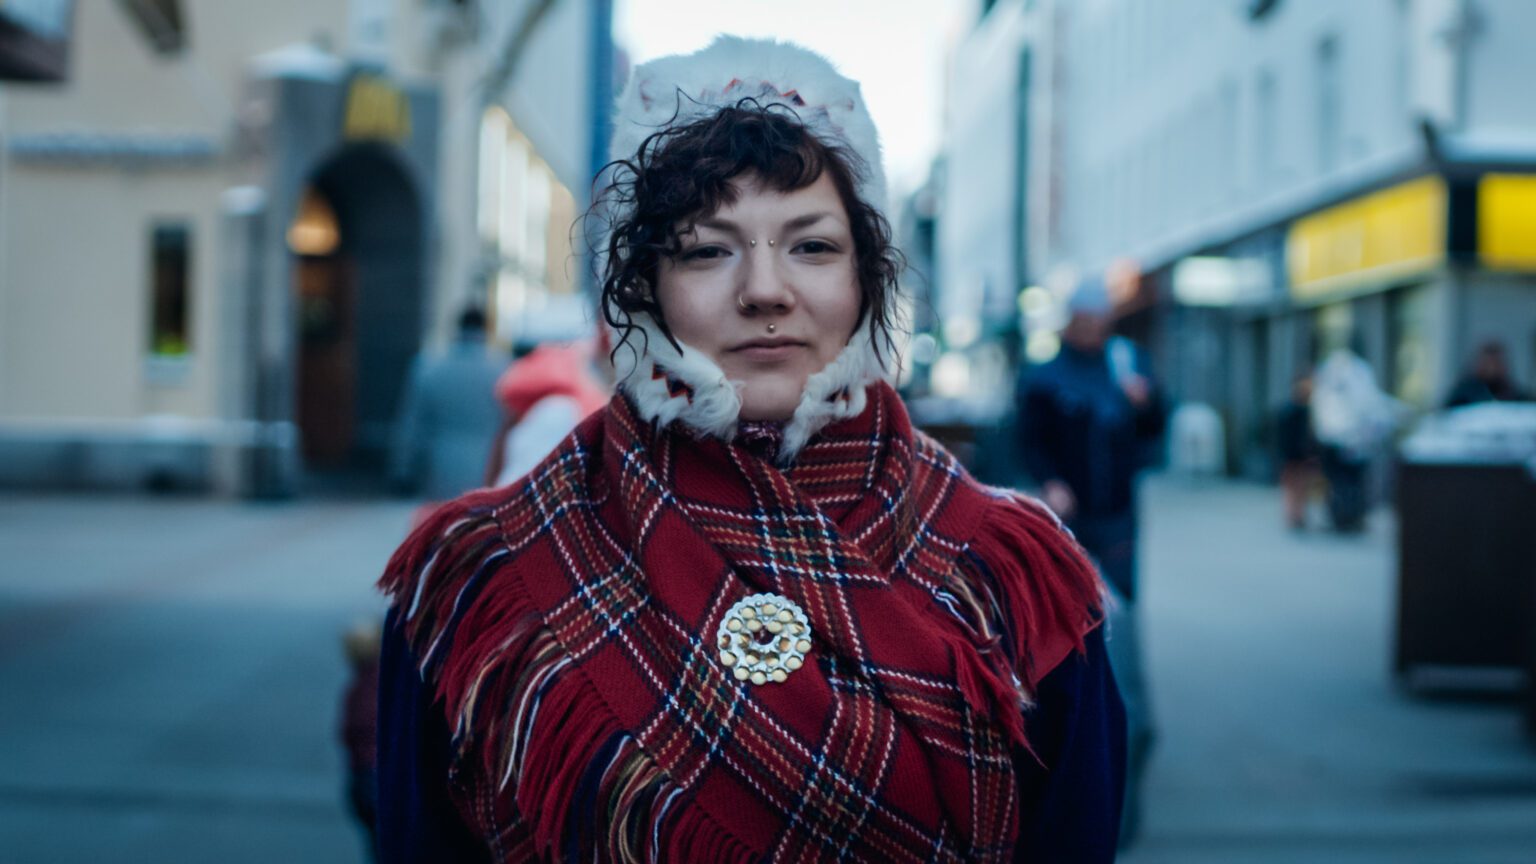 Ida-Maria Helander is the former president and current vice president of the Finnish Sámi Youth. The 2021 film “Eatnameamet” (“Our Silent Struggle") focuses on the present-day endeavor of the Sámis to maintain their Indigenous culture and way of life. It can be seen as part of a Finnish Film Showcase taking place Feb. 3–5 at the FireHouse Arts and Events Center.